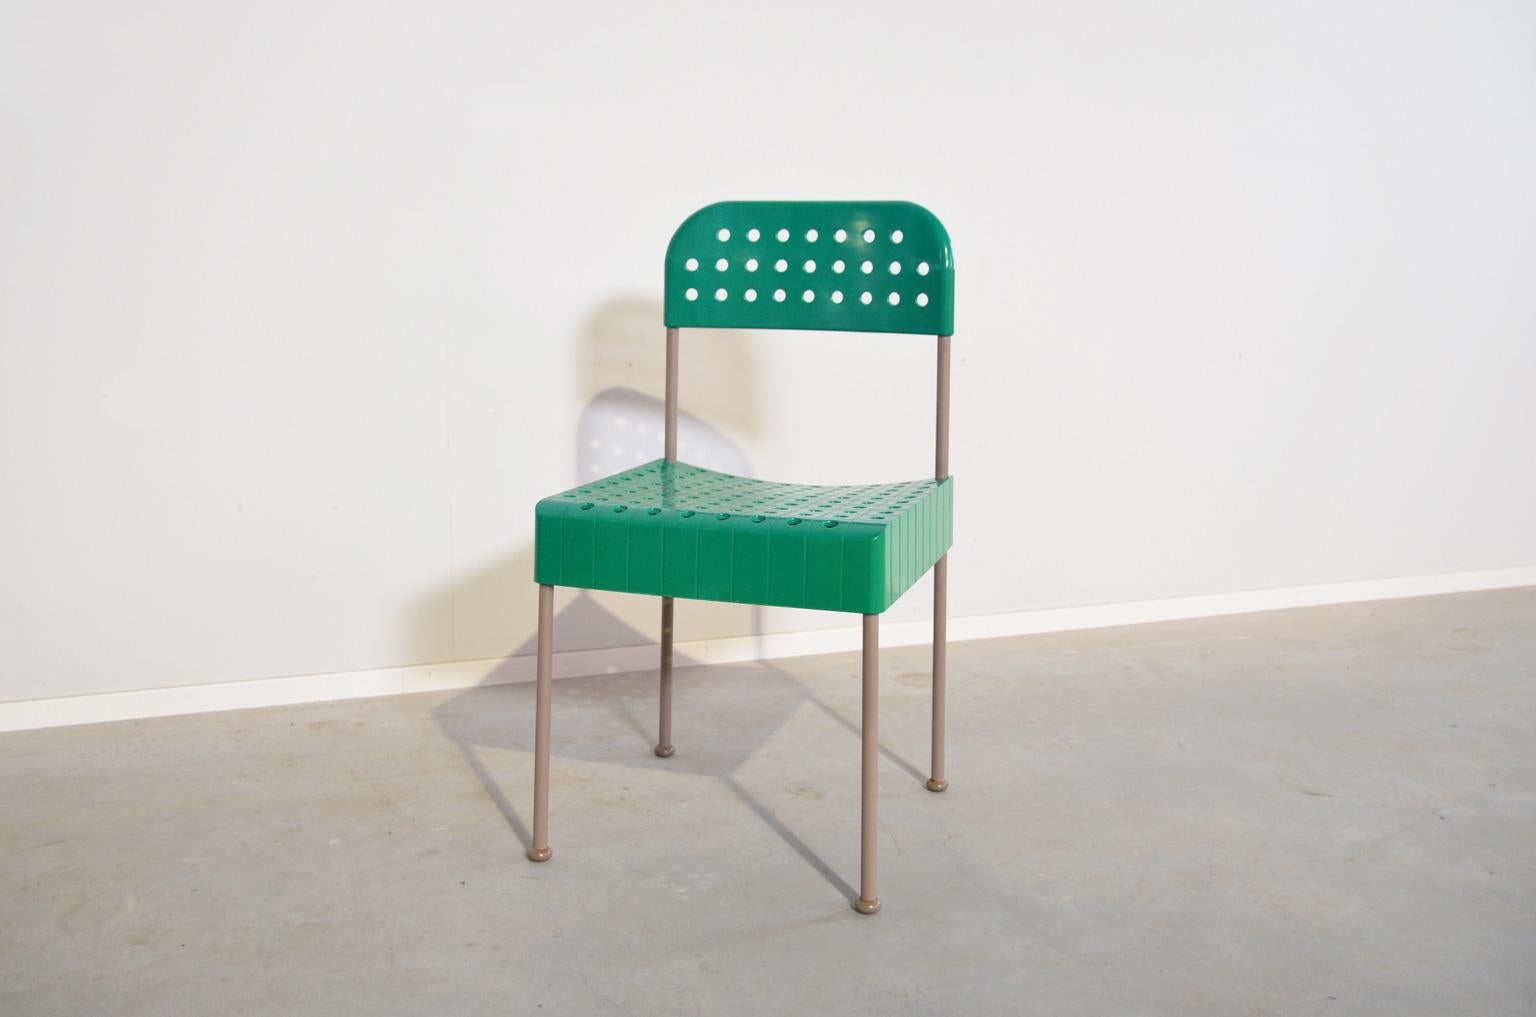 The Box chair is a good example of a rational design, the components can be easily dismantled and packed into a flat box as big as the seating of the chair. This chair comes in a fresh green color and is marked under the seating.